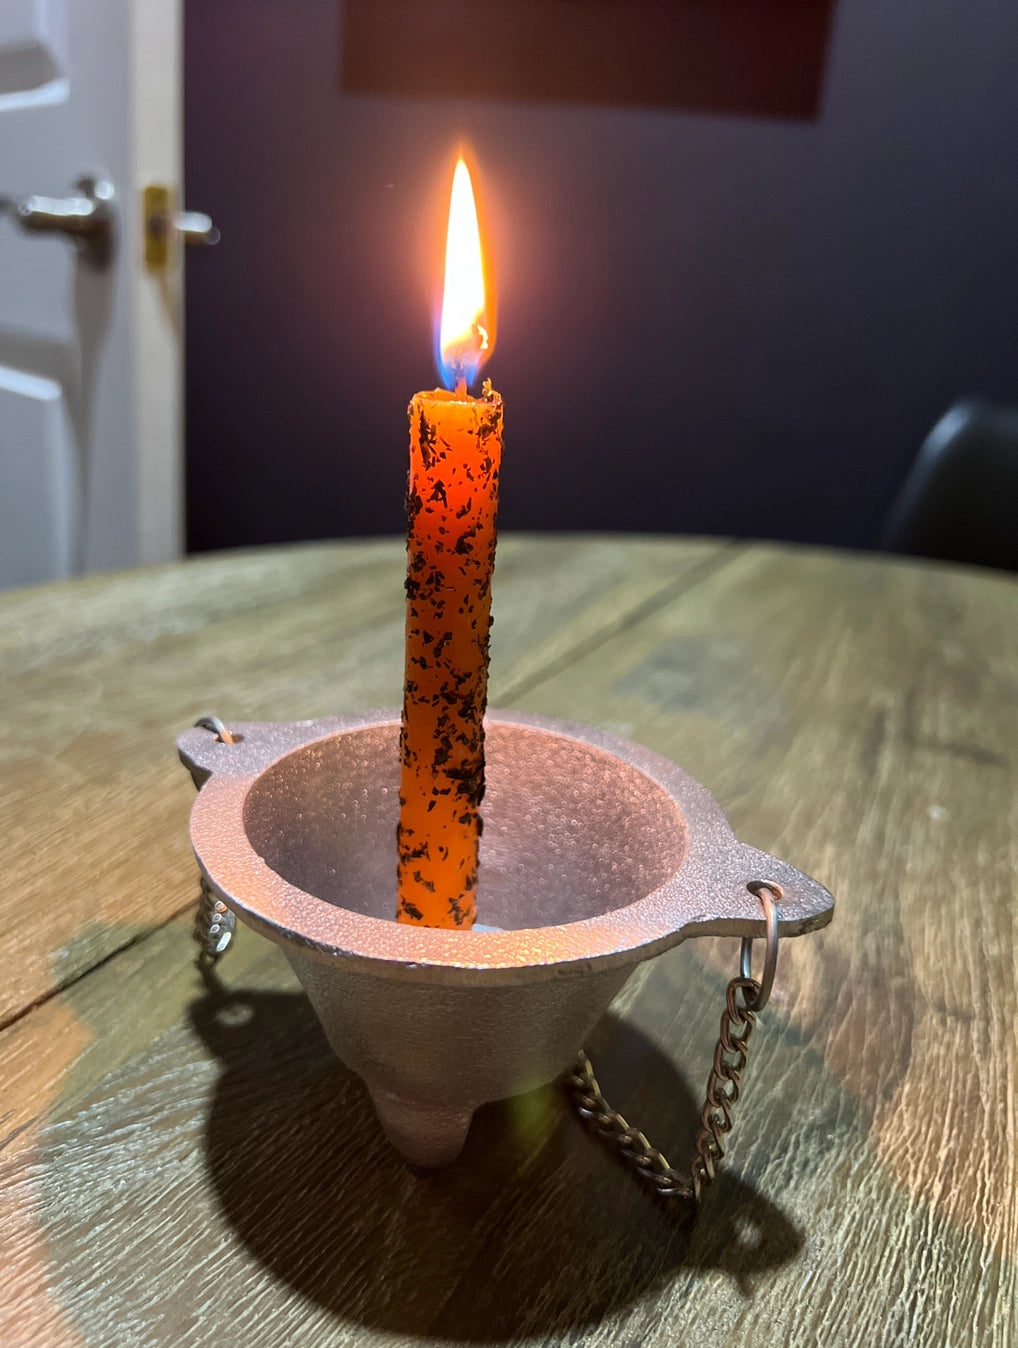 Protection Ritual Candle